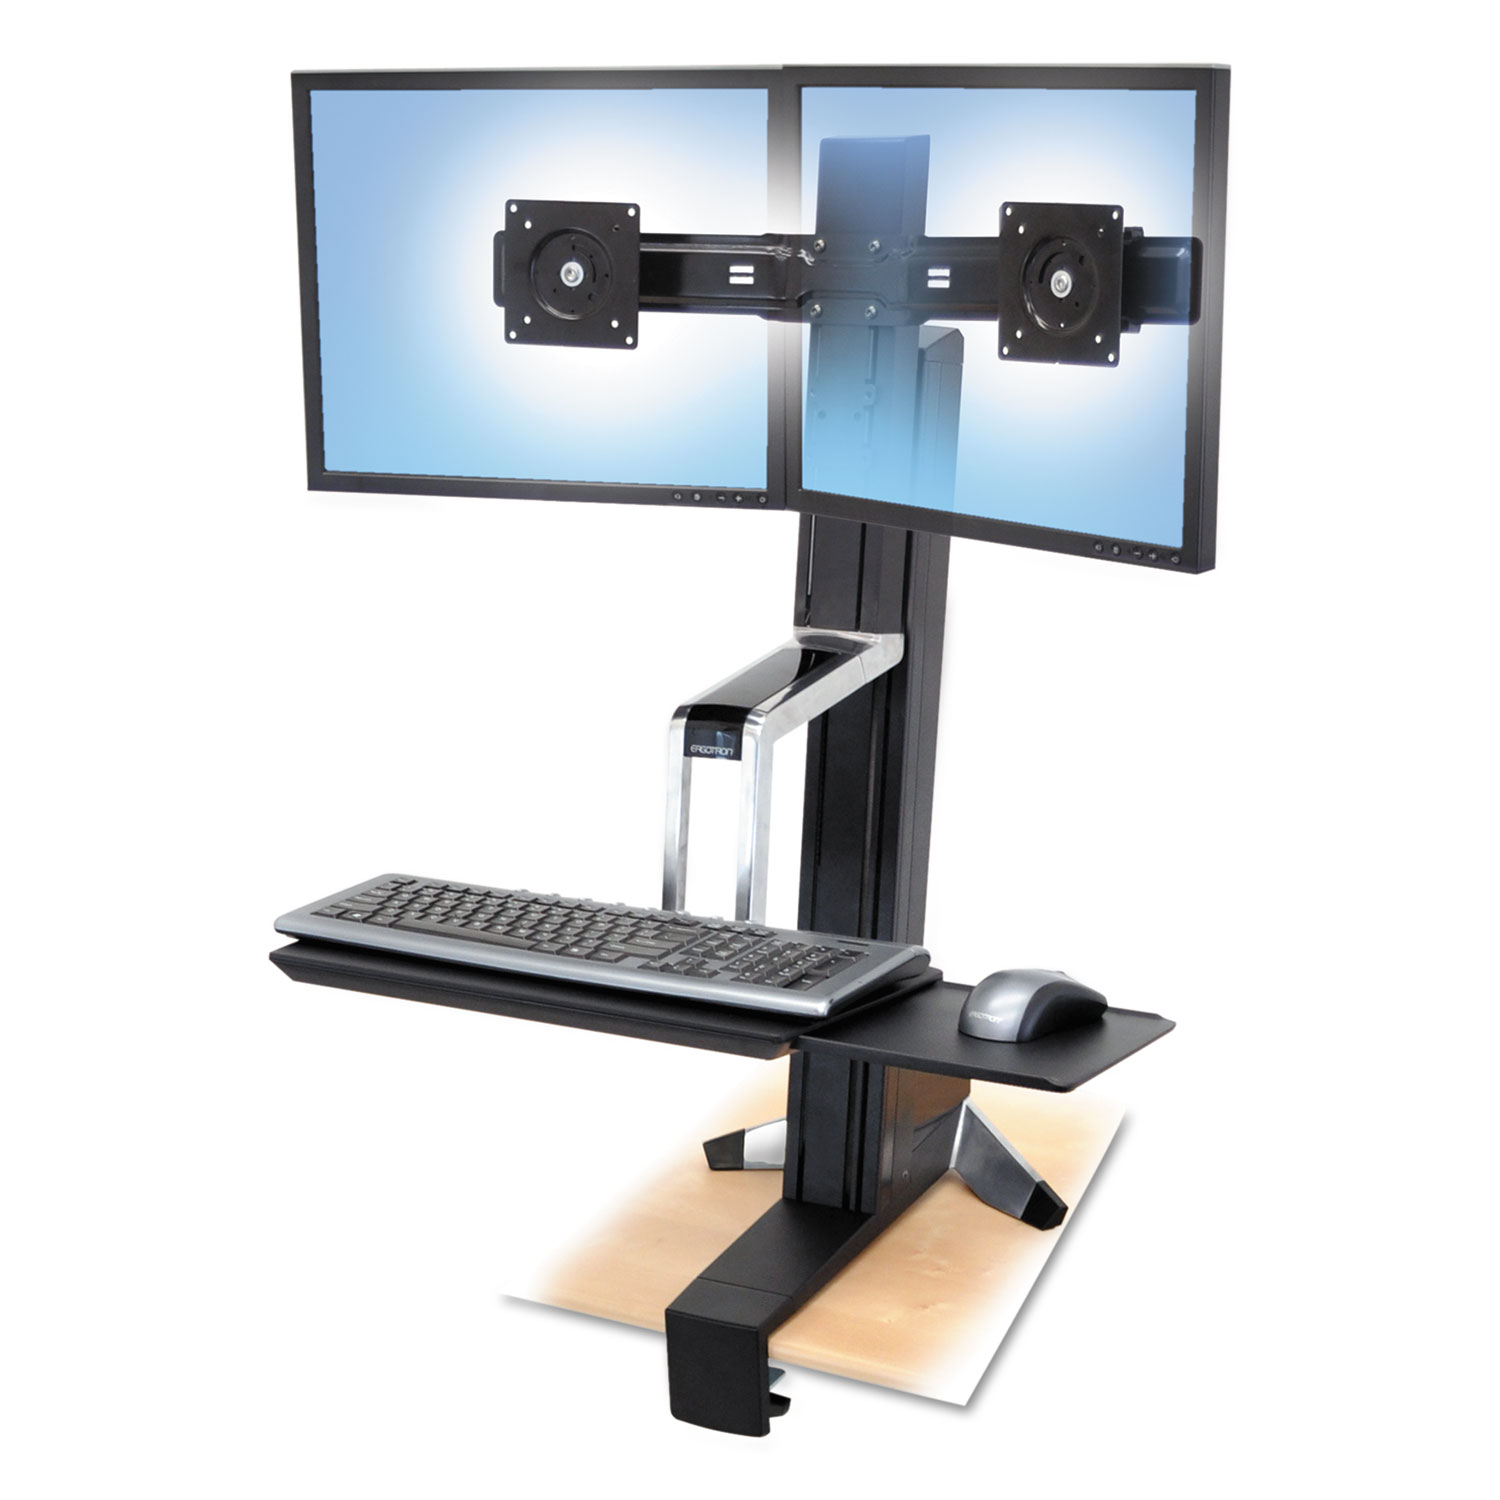  WorkFit by Ergotron 33-341-200 WorkFit-S Sit-Stand Workstation without Worksurface, Dual, Aluminum/Black (ERG33341200) 